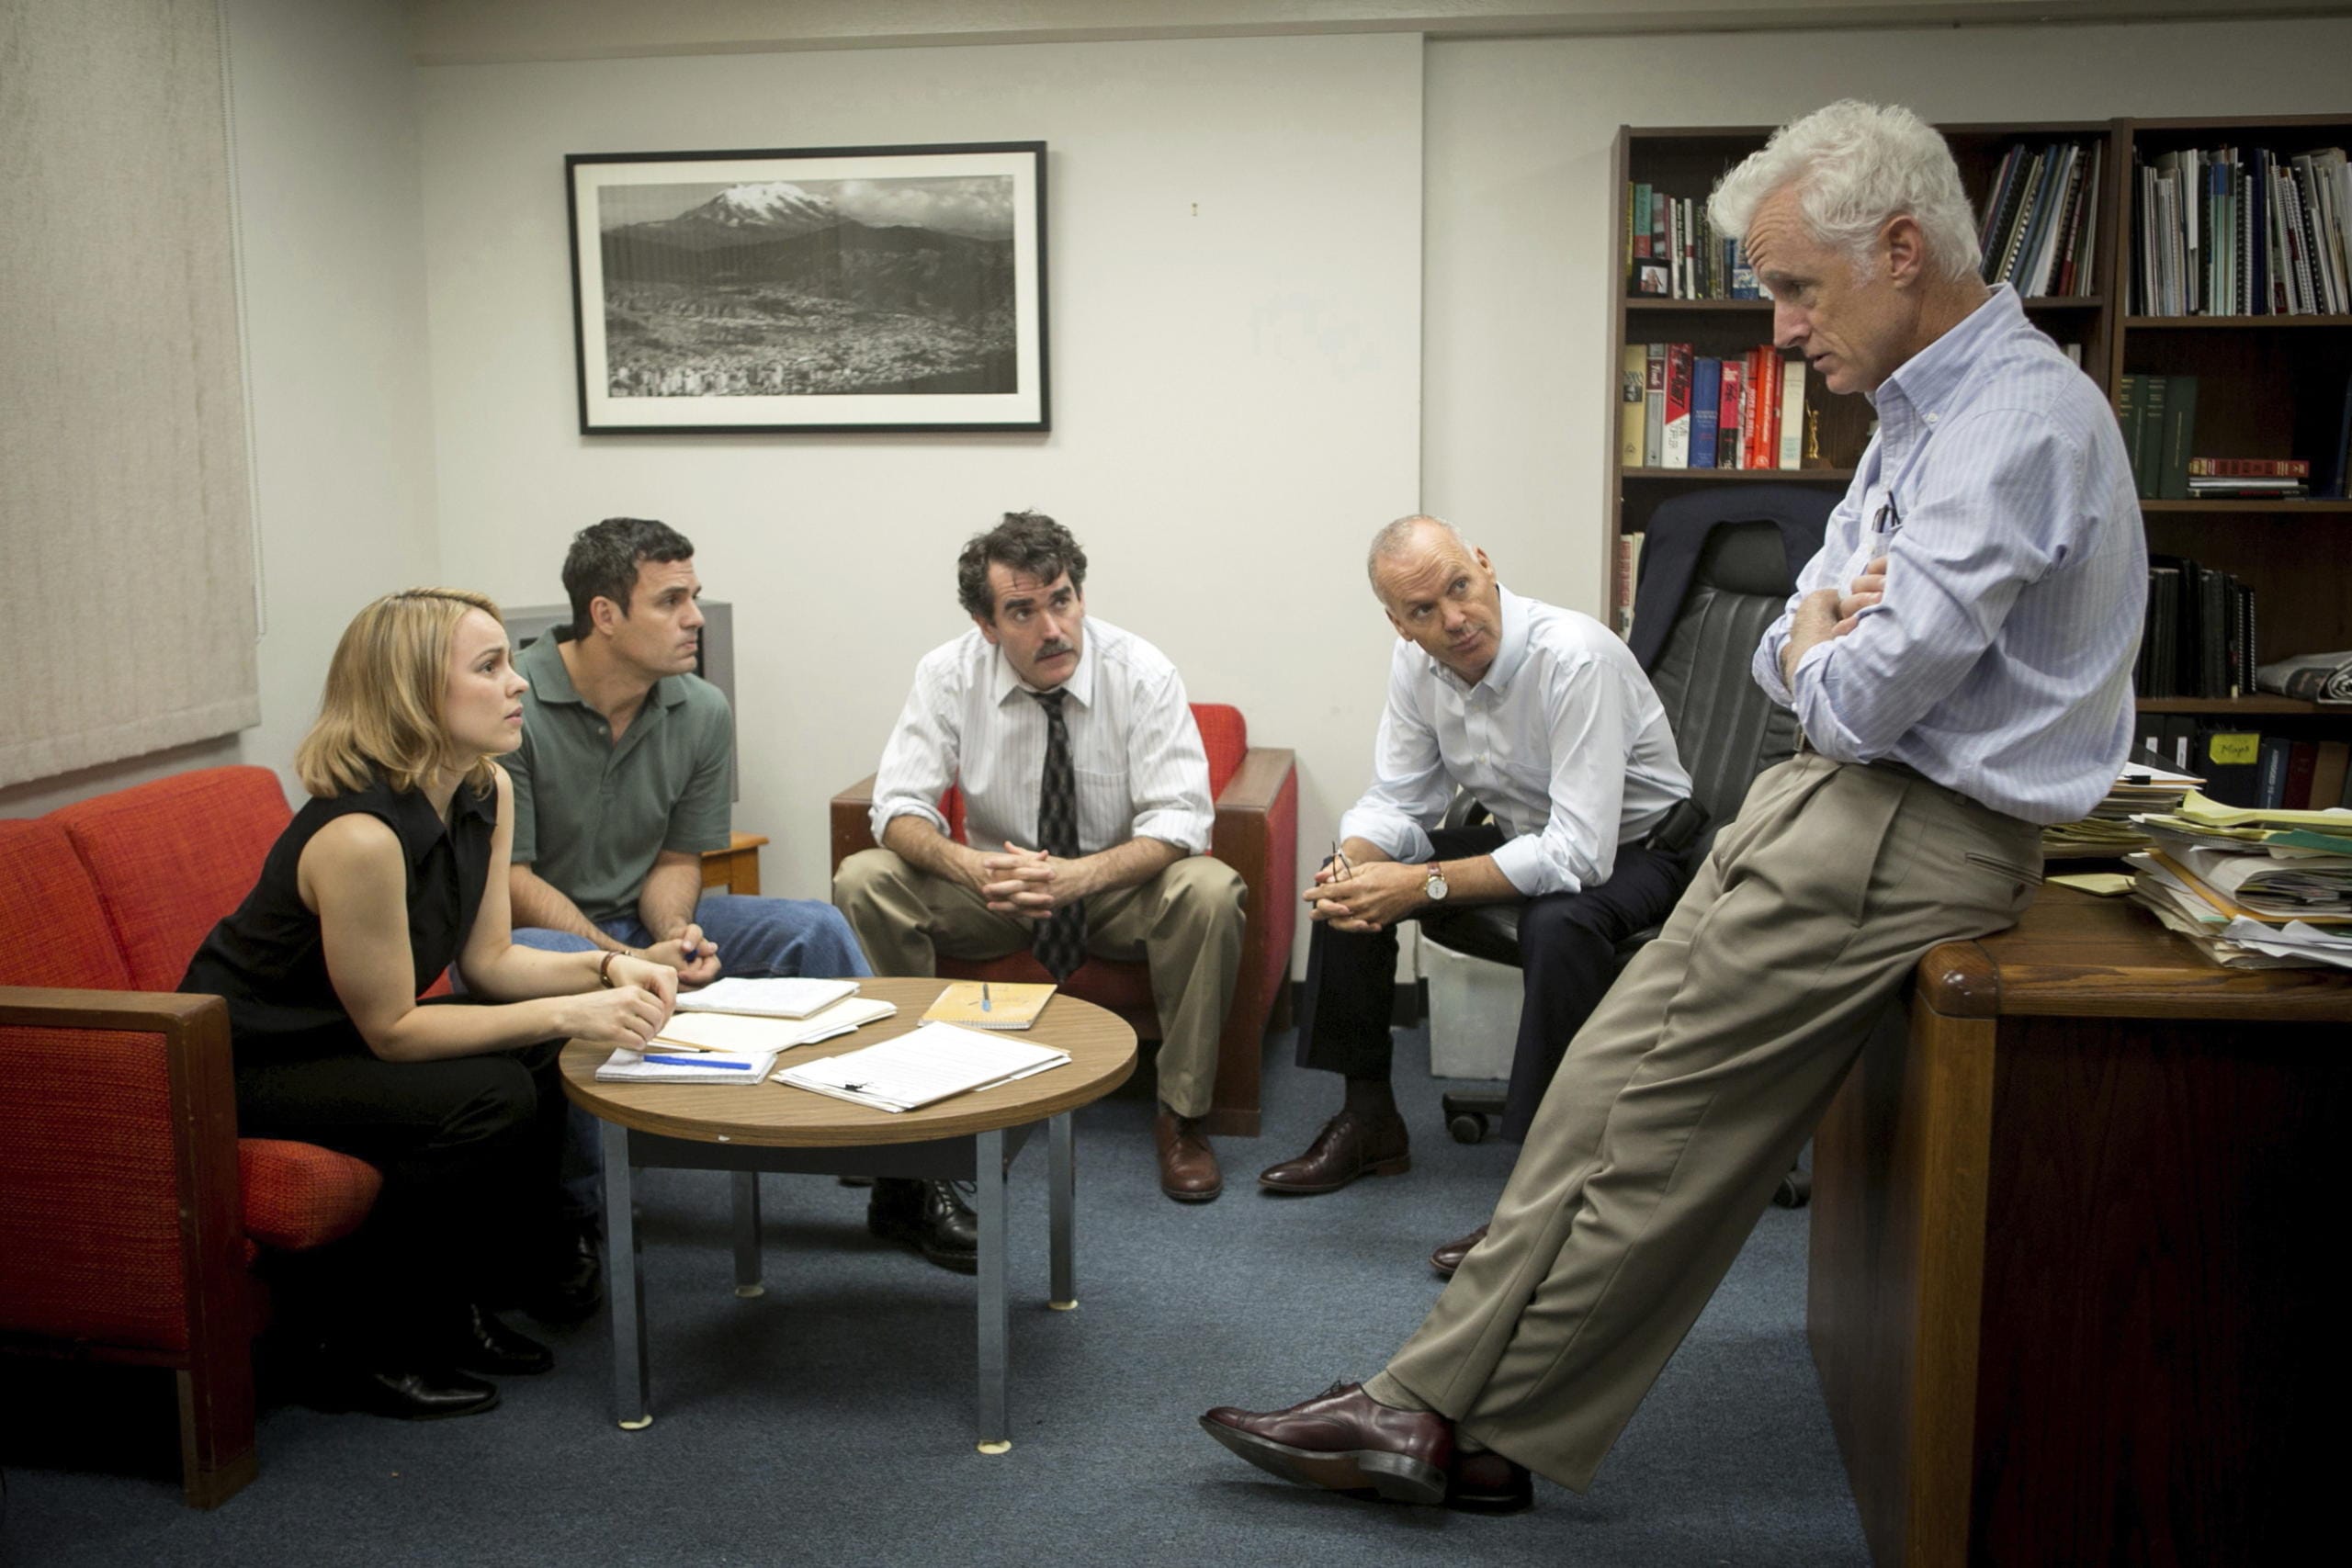 With the pandemic we can’t get a group photo of the editors, but rest assured we look nothing like this still from the movie “Spotlight.” From left: Rachel McAdams, as Sacha Pfeiffer, Mark Ruffalo as Michael Rezendes, Brian d'Arcy James as Matt Carroll, Michael Keaton as Walter "Robby" Robinson and John Slattery as Ben Bradlee Jr.